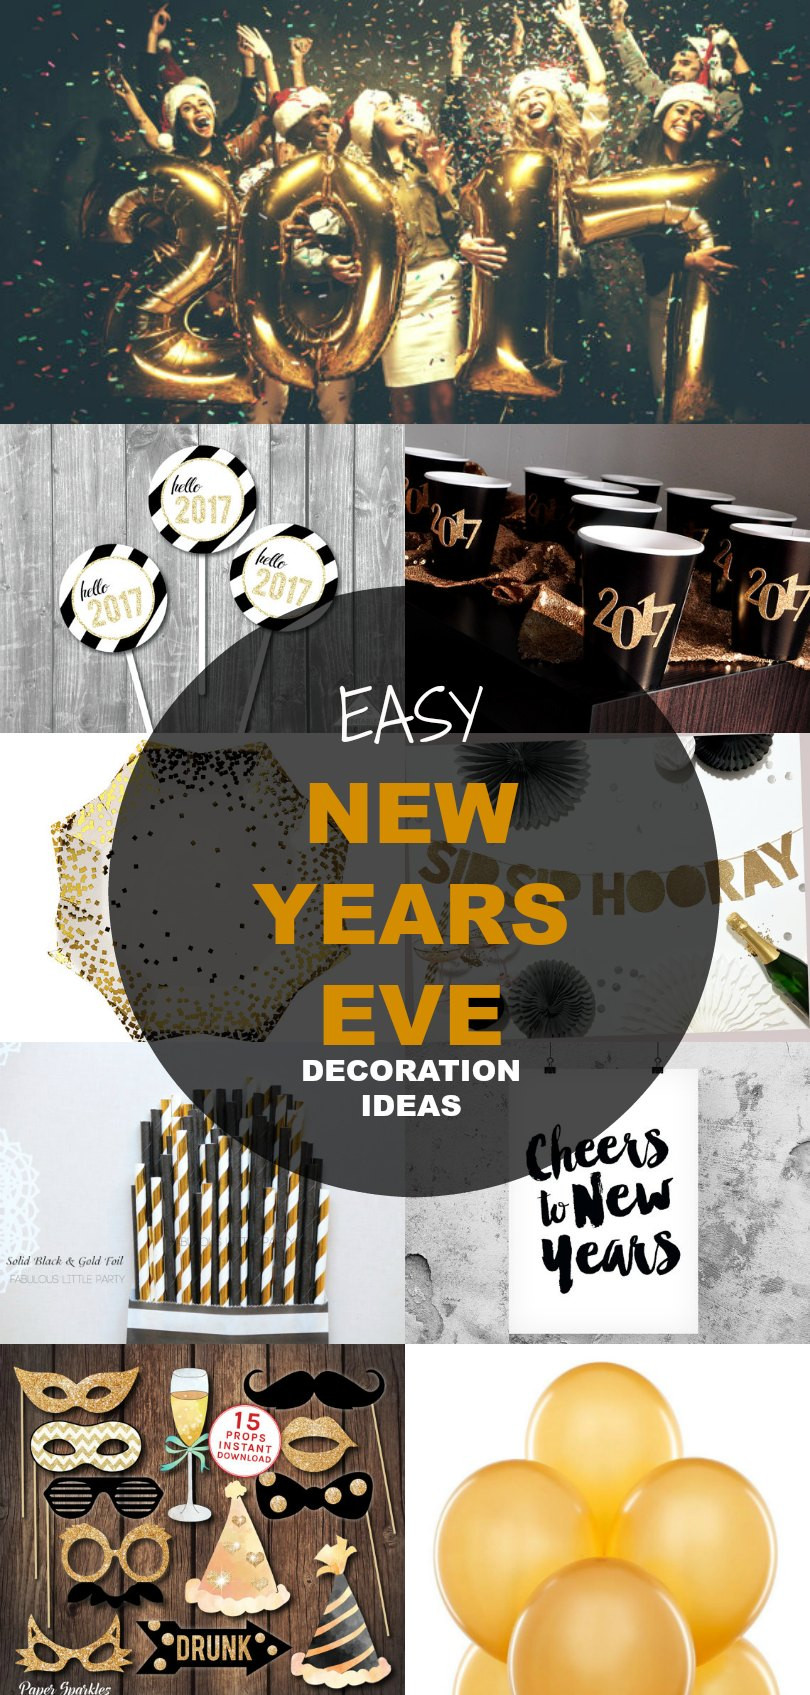 New Year Eve Themes Ideas
 21 New Years Eve Decoration Ideas